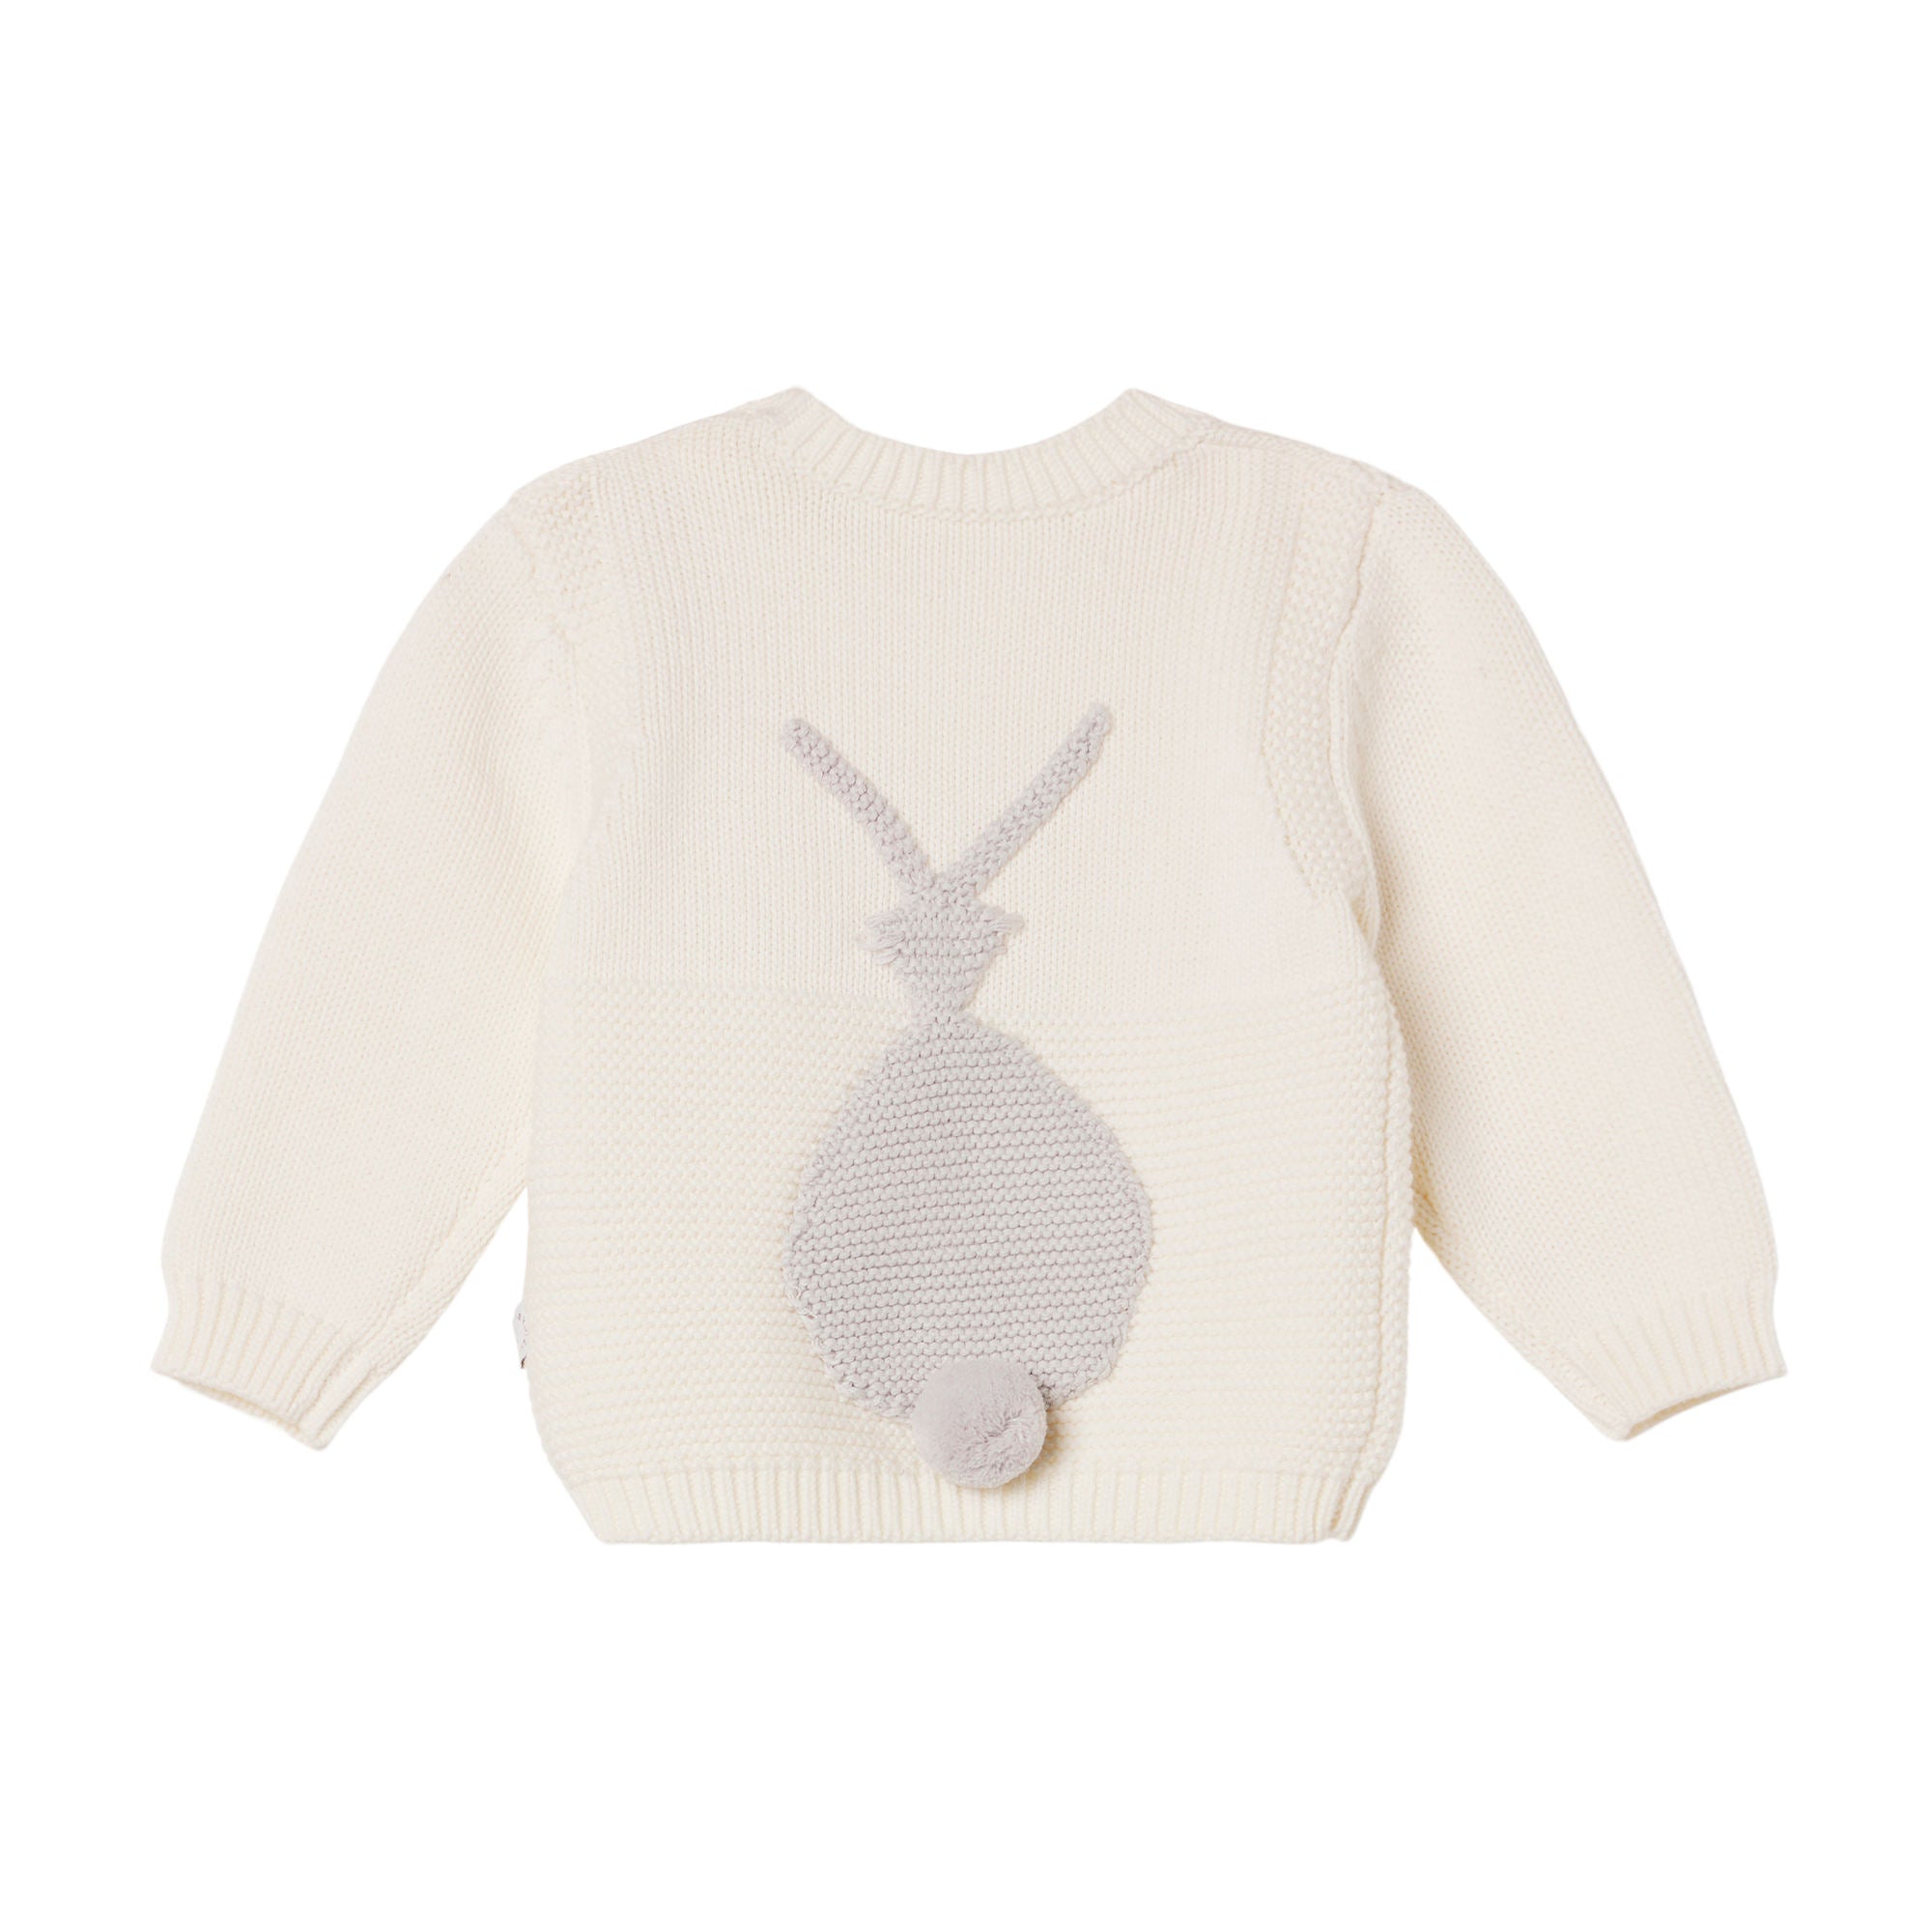 Stella McCartney White Baby Knit Sweater with Bunny Patch and Pompom